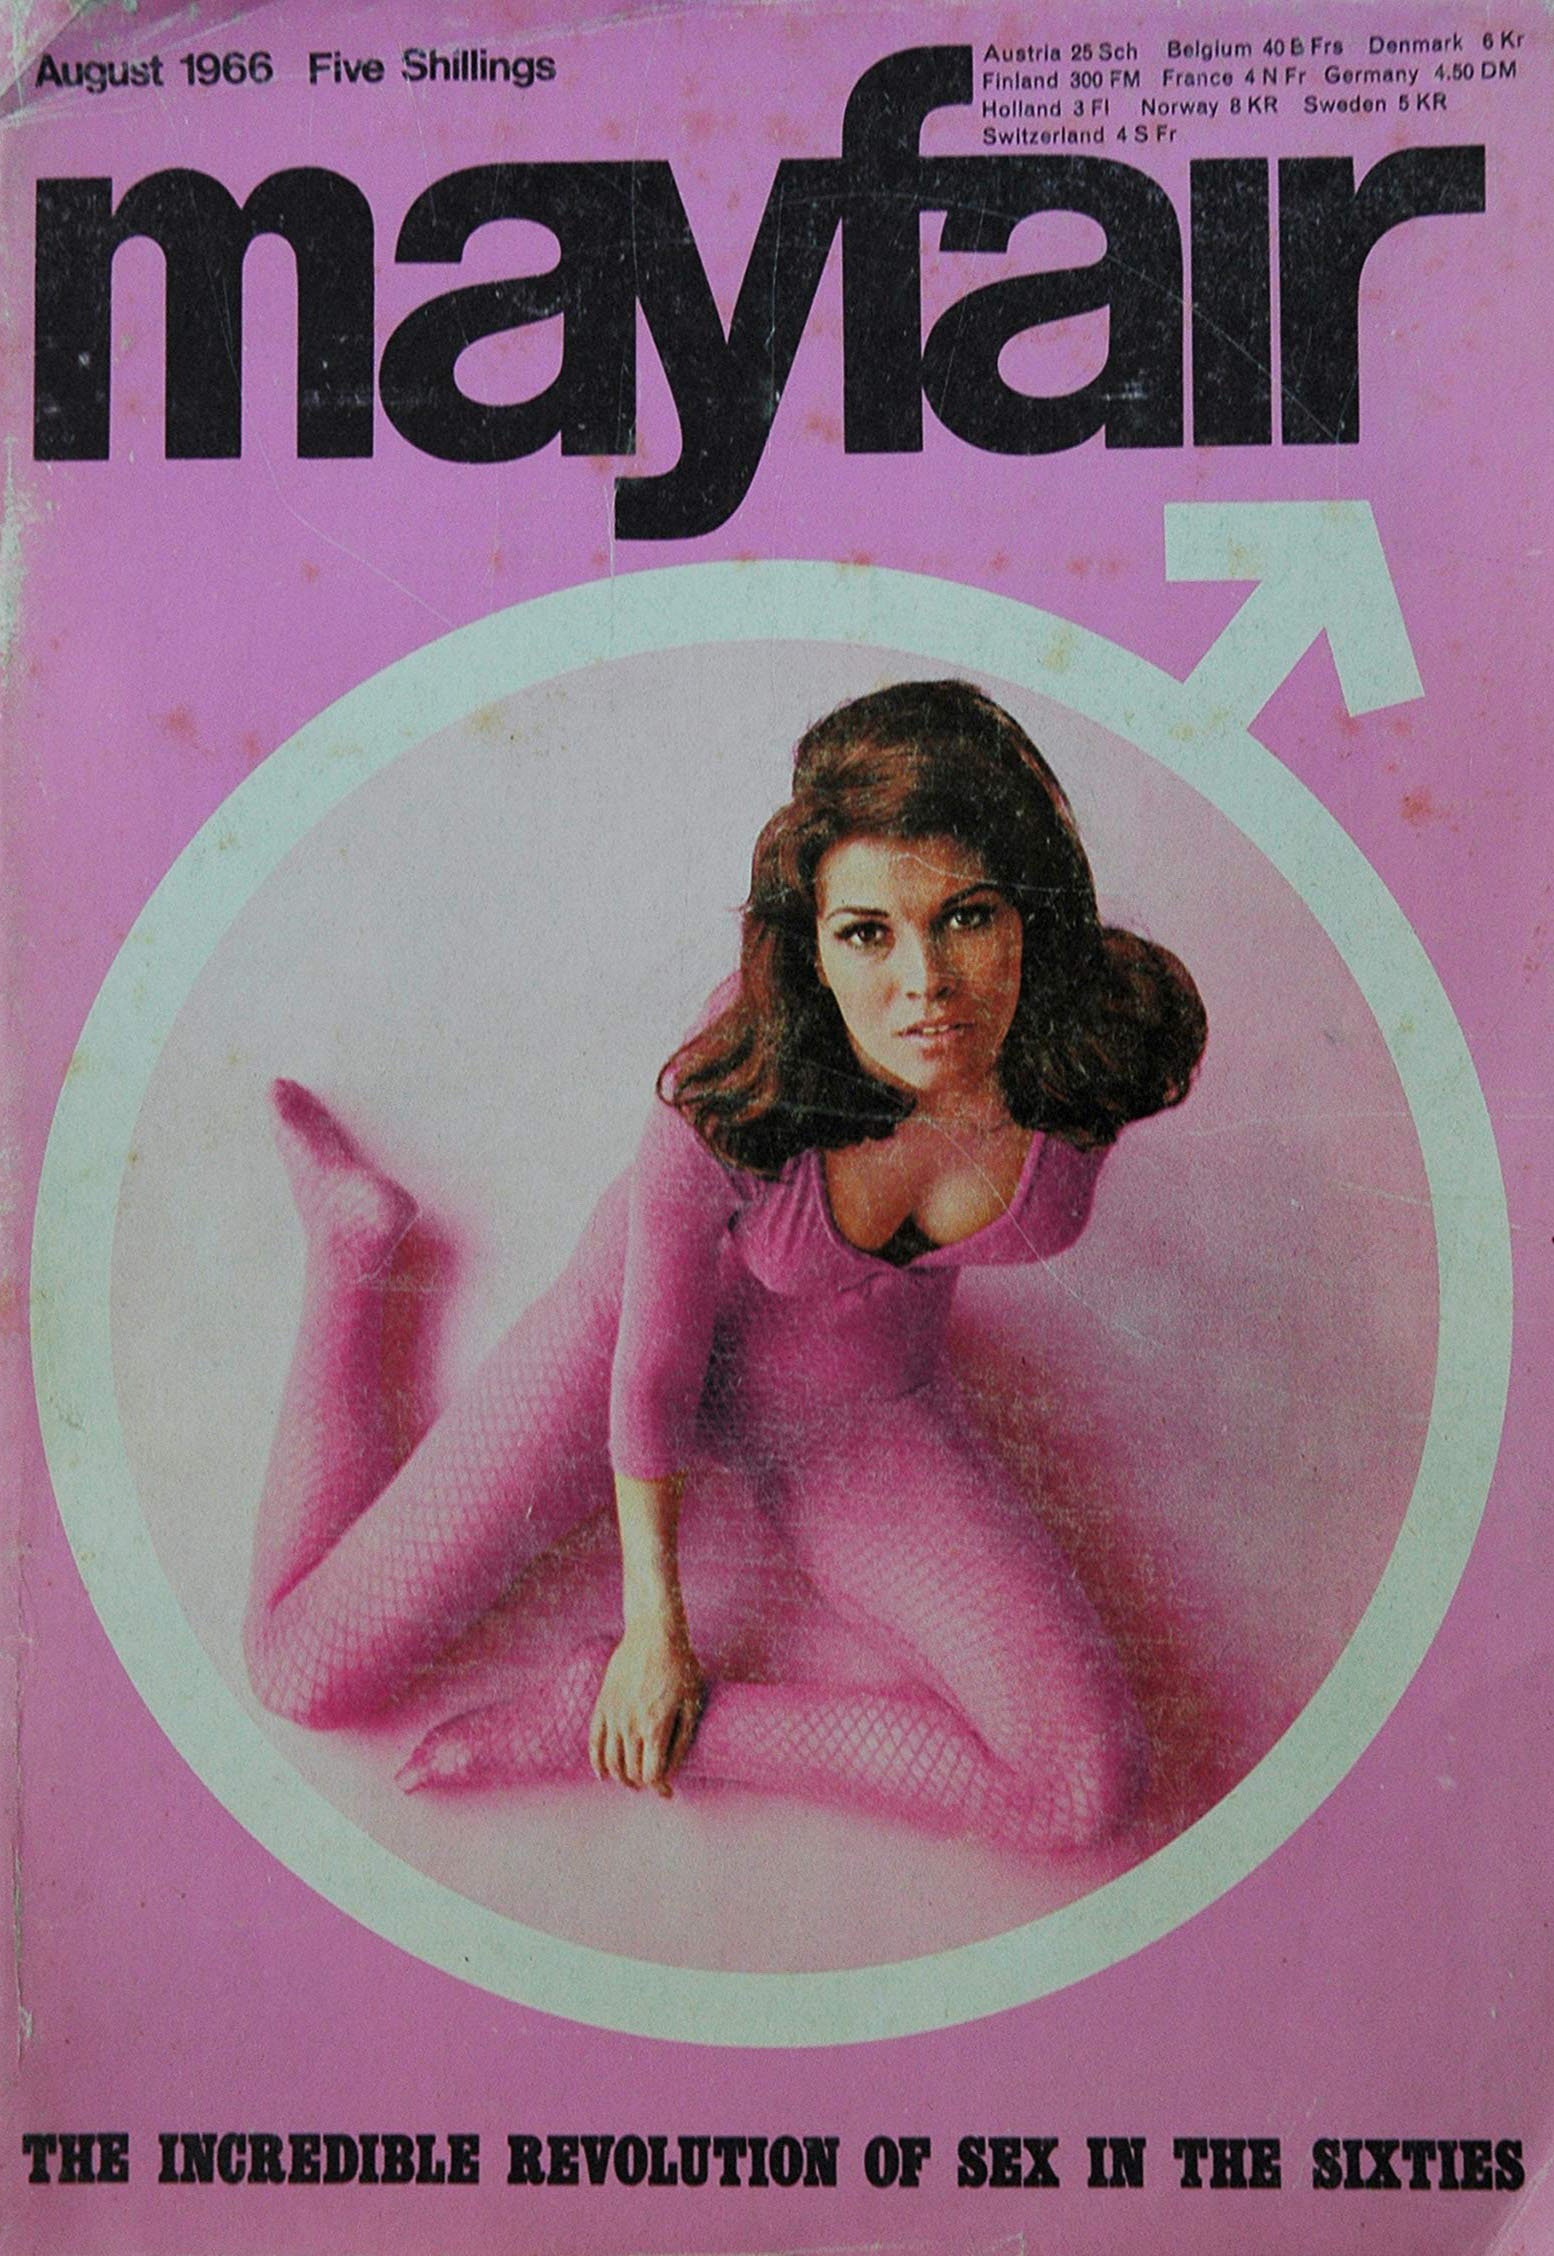 Mayfair Vol. 1 # 8 magazine back issue Mayfair magizine back copy Mayfair Vol. 1 # 8 Vintage Adult Magazine Back Issue Published by Paul Raymond Publishing Group. August 1966 Five Shillings.